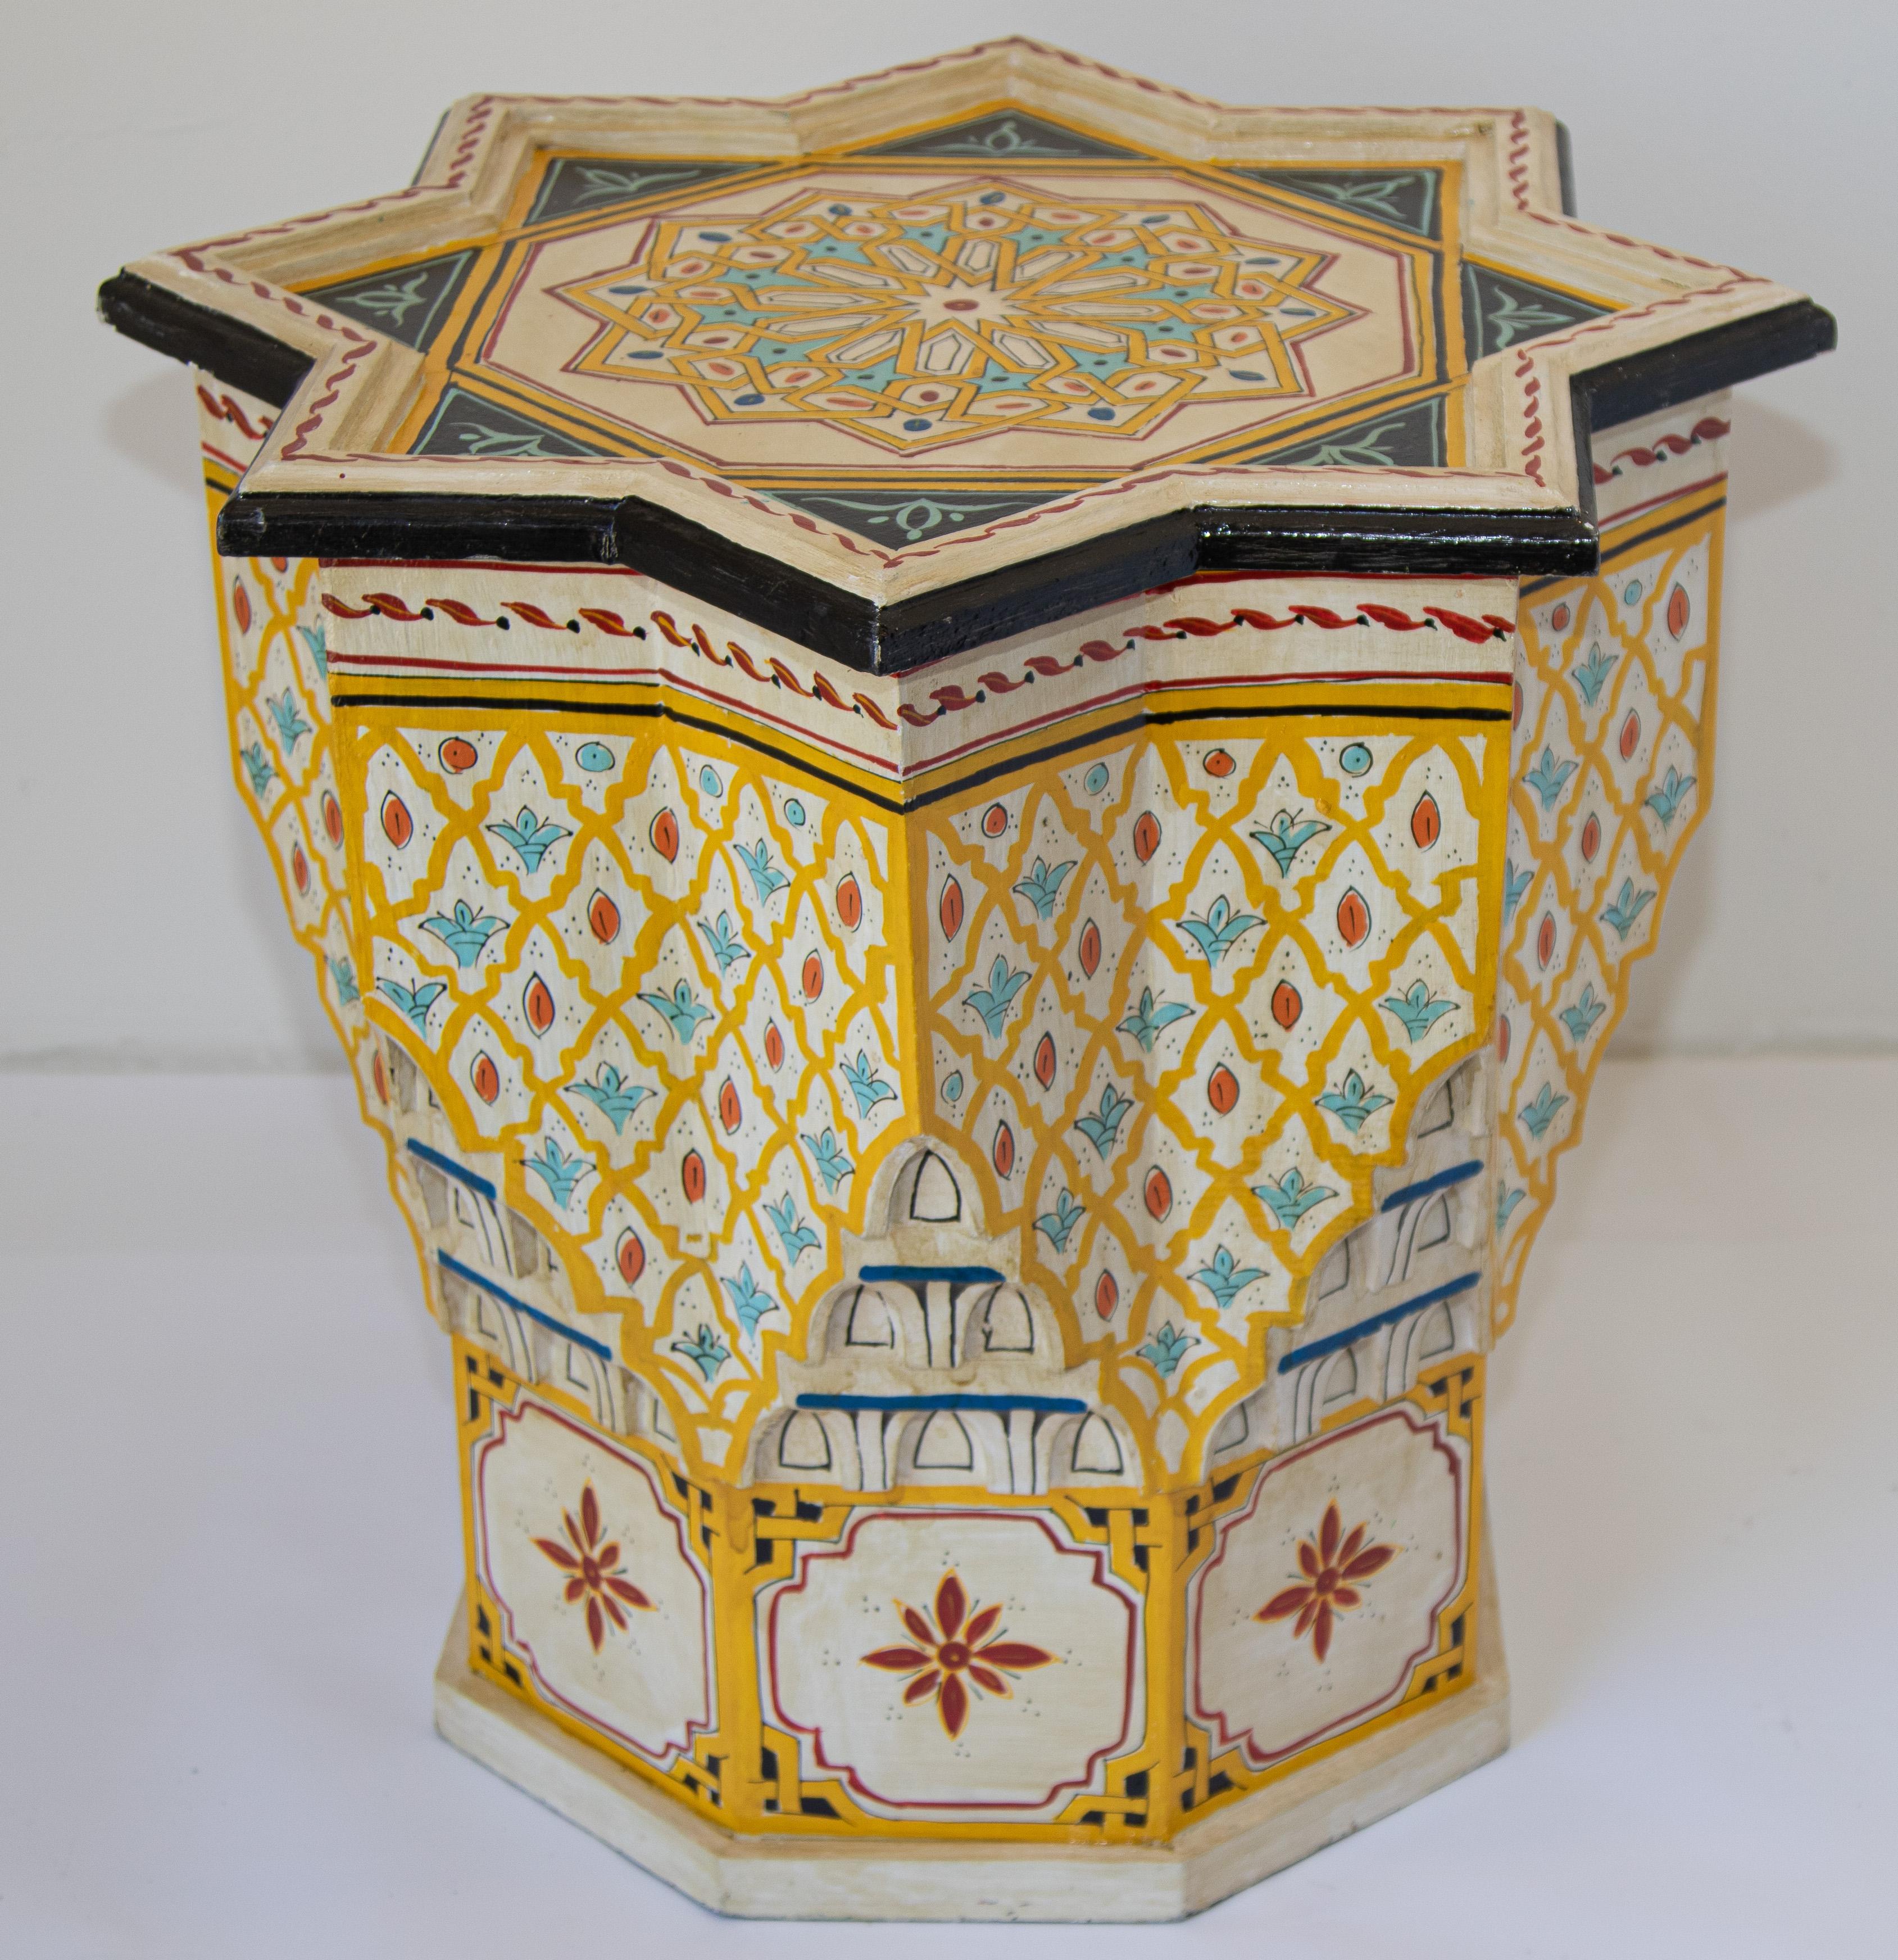 Moroccan colorful yellow color hand painted and carved side occasional table with Moorish designs.
Vintage Moroccan Pedestal table in yellow background with multicolored floral and geometric designs.
Very decorative Moroccan table with fine